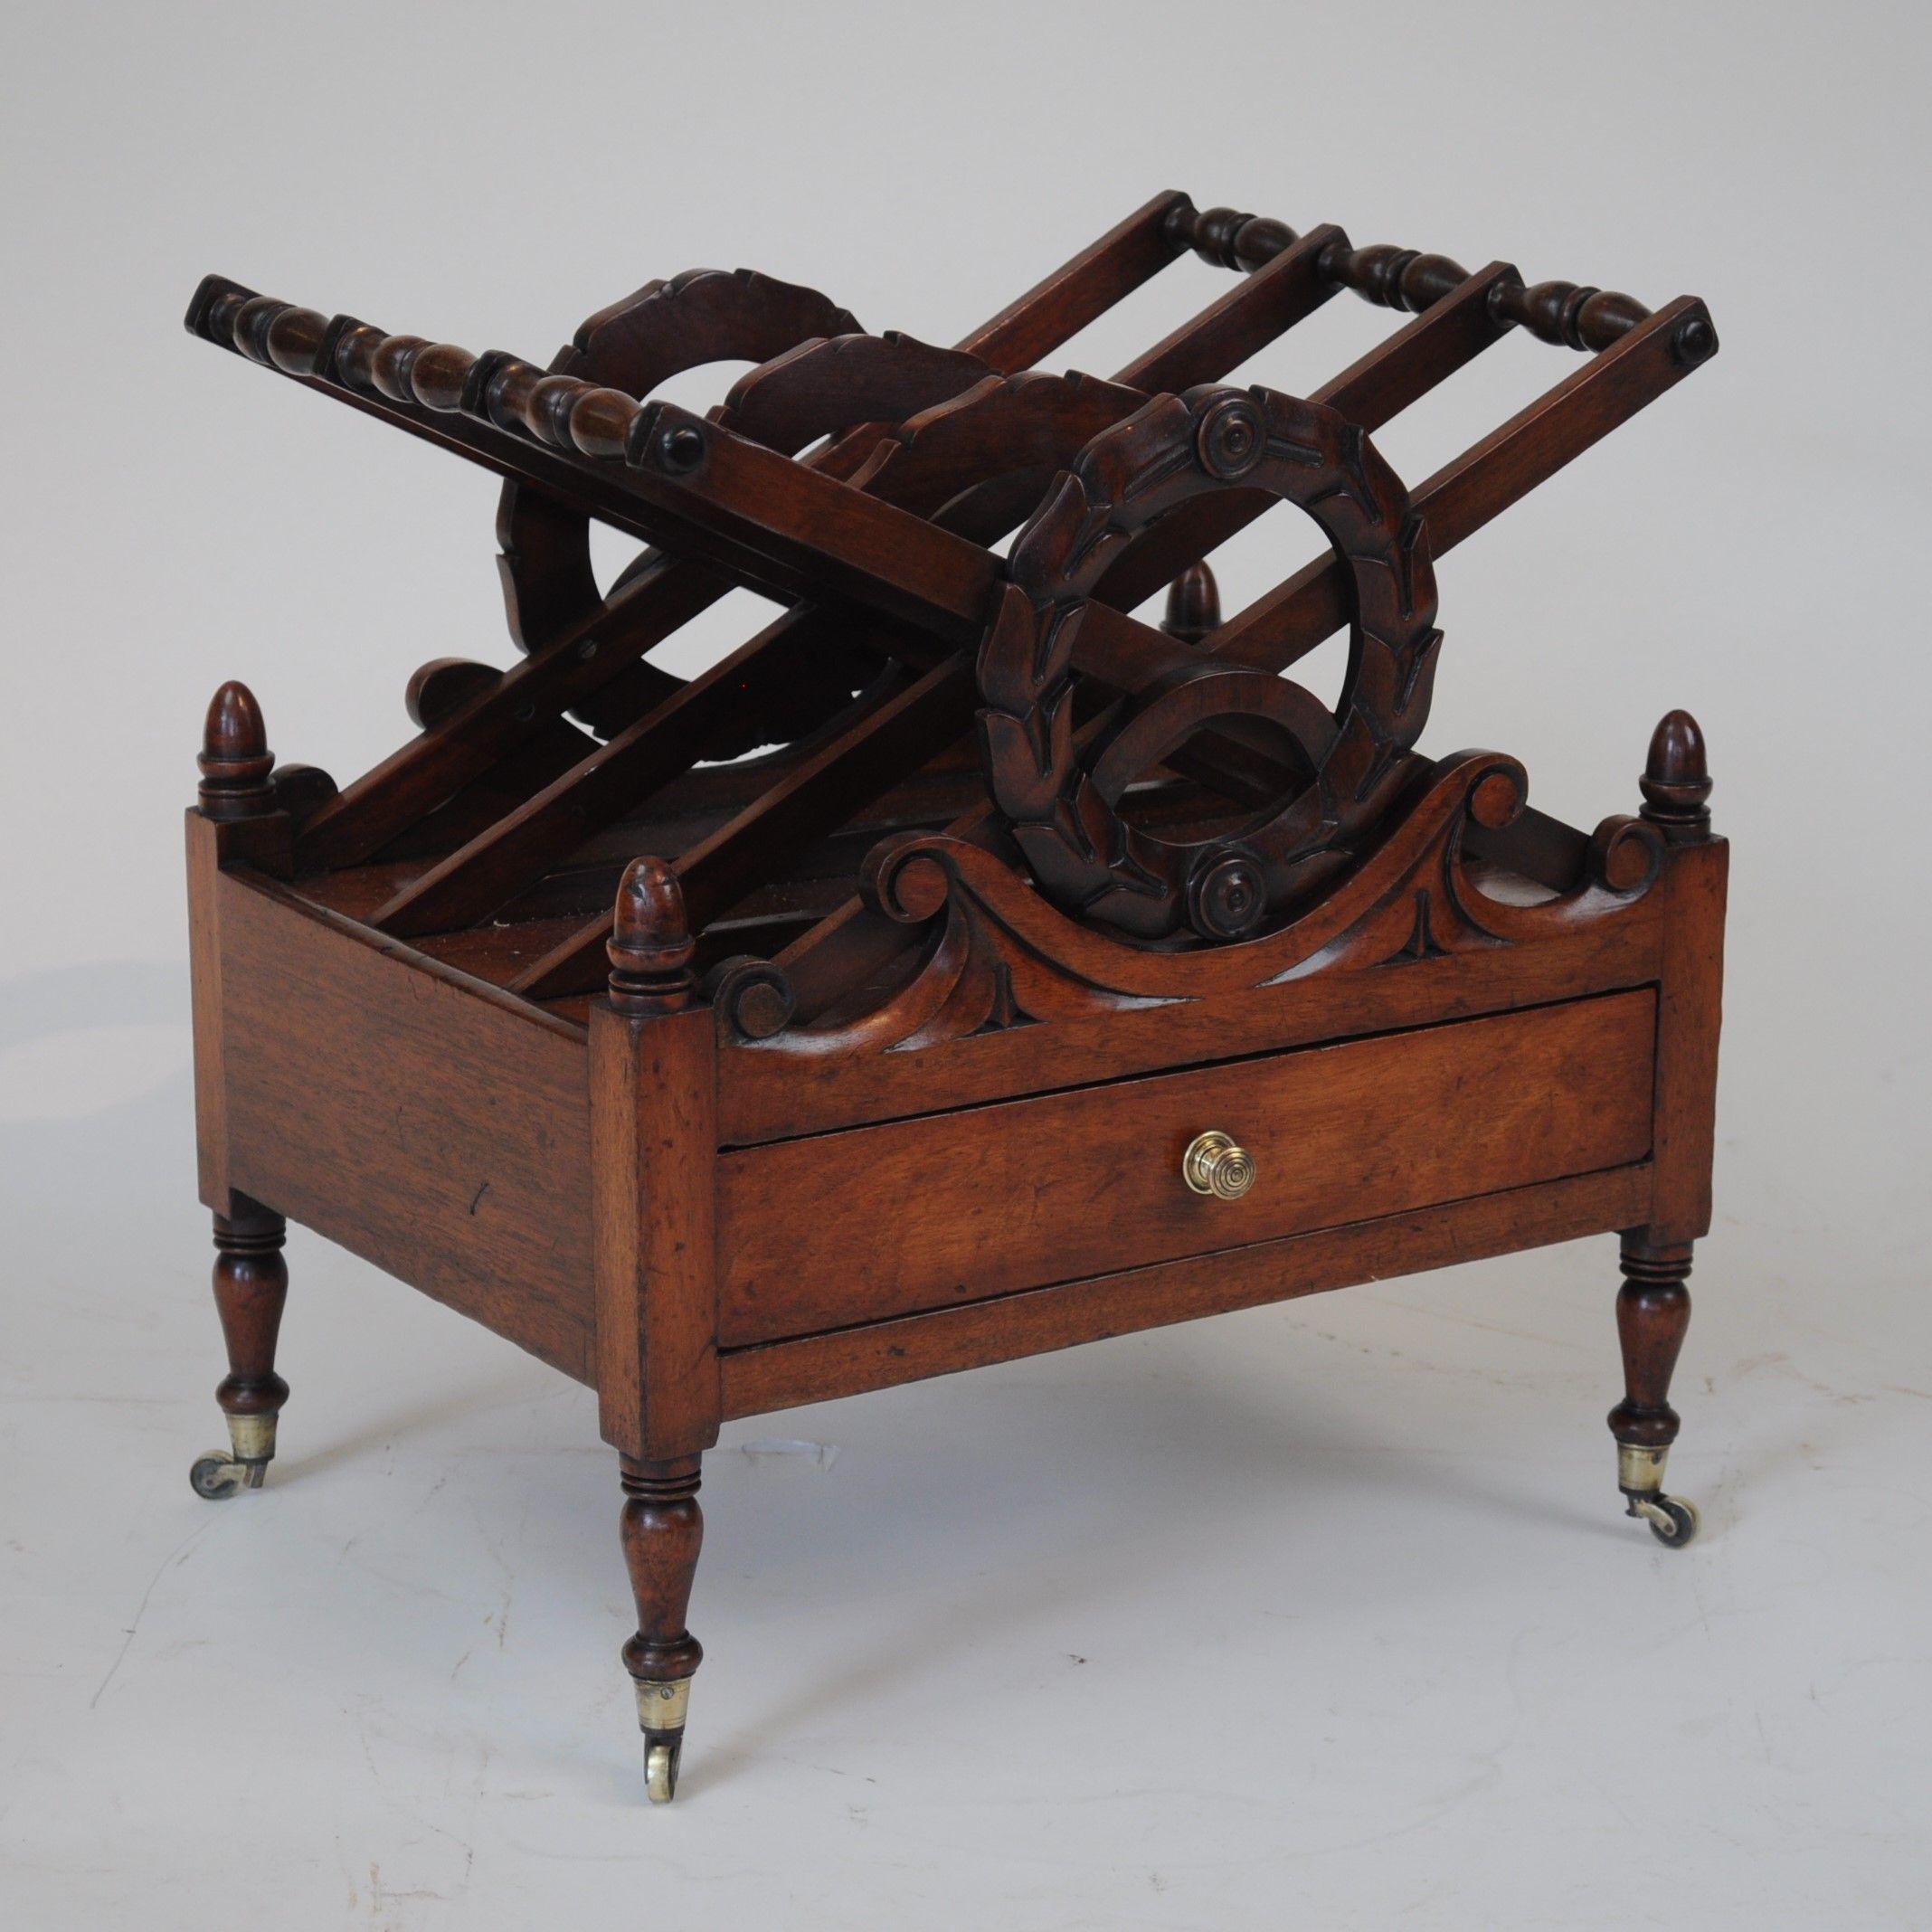 A good quality early 19th century mahogany Canterbury carved with a laurel wreath to the front and with 'X' shaped dividers, standing on slender turned legs with original brass castors, and with original turned wooden handles to the drawer.